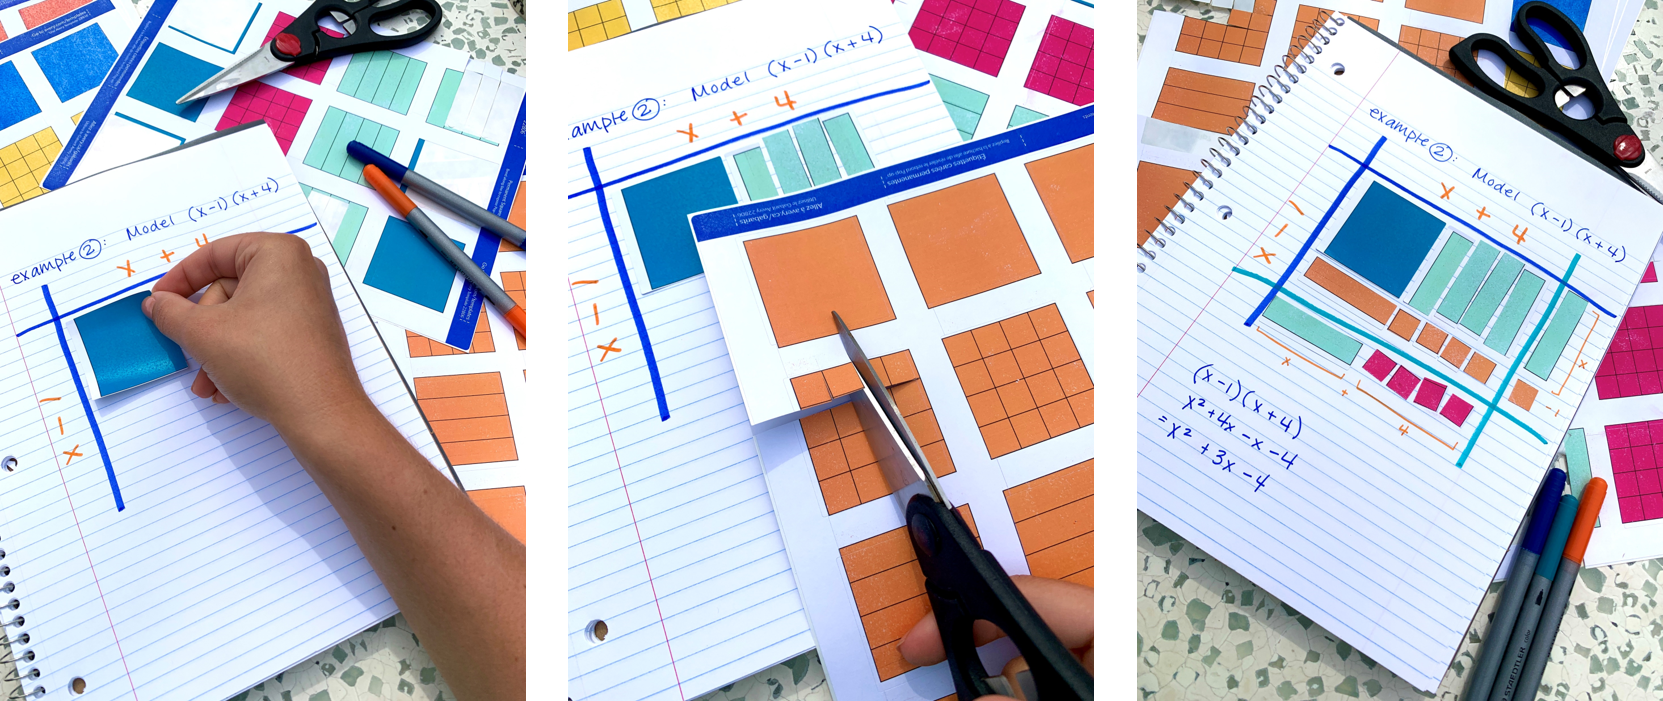 Algebra Tiles Sticker Templates for Student Math Notes